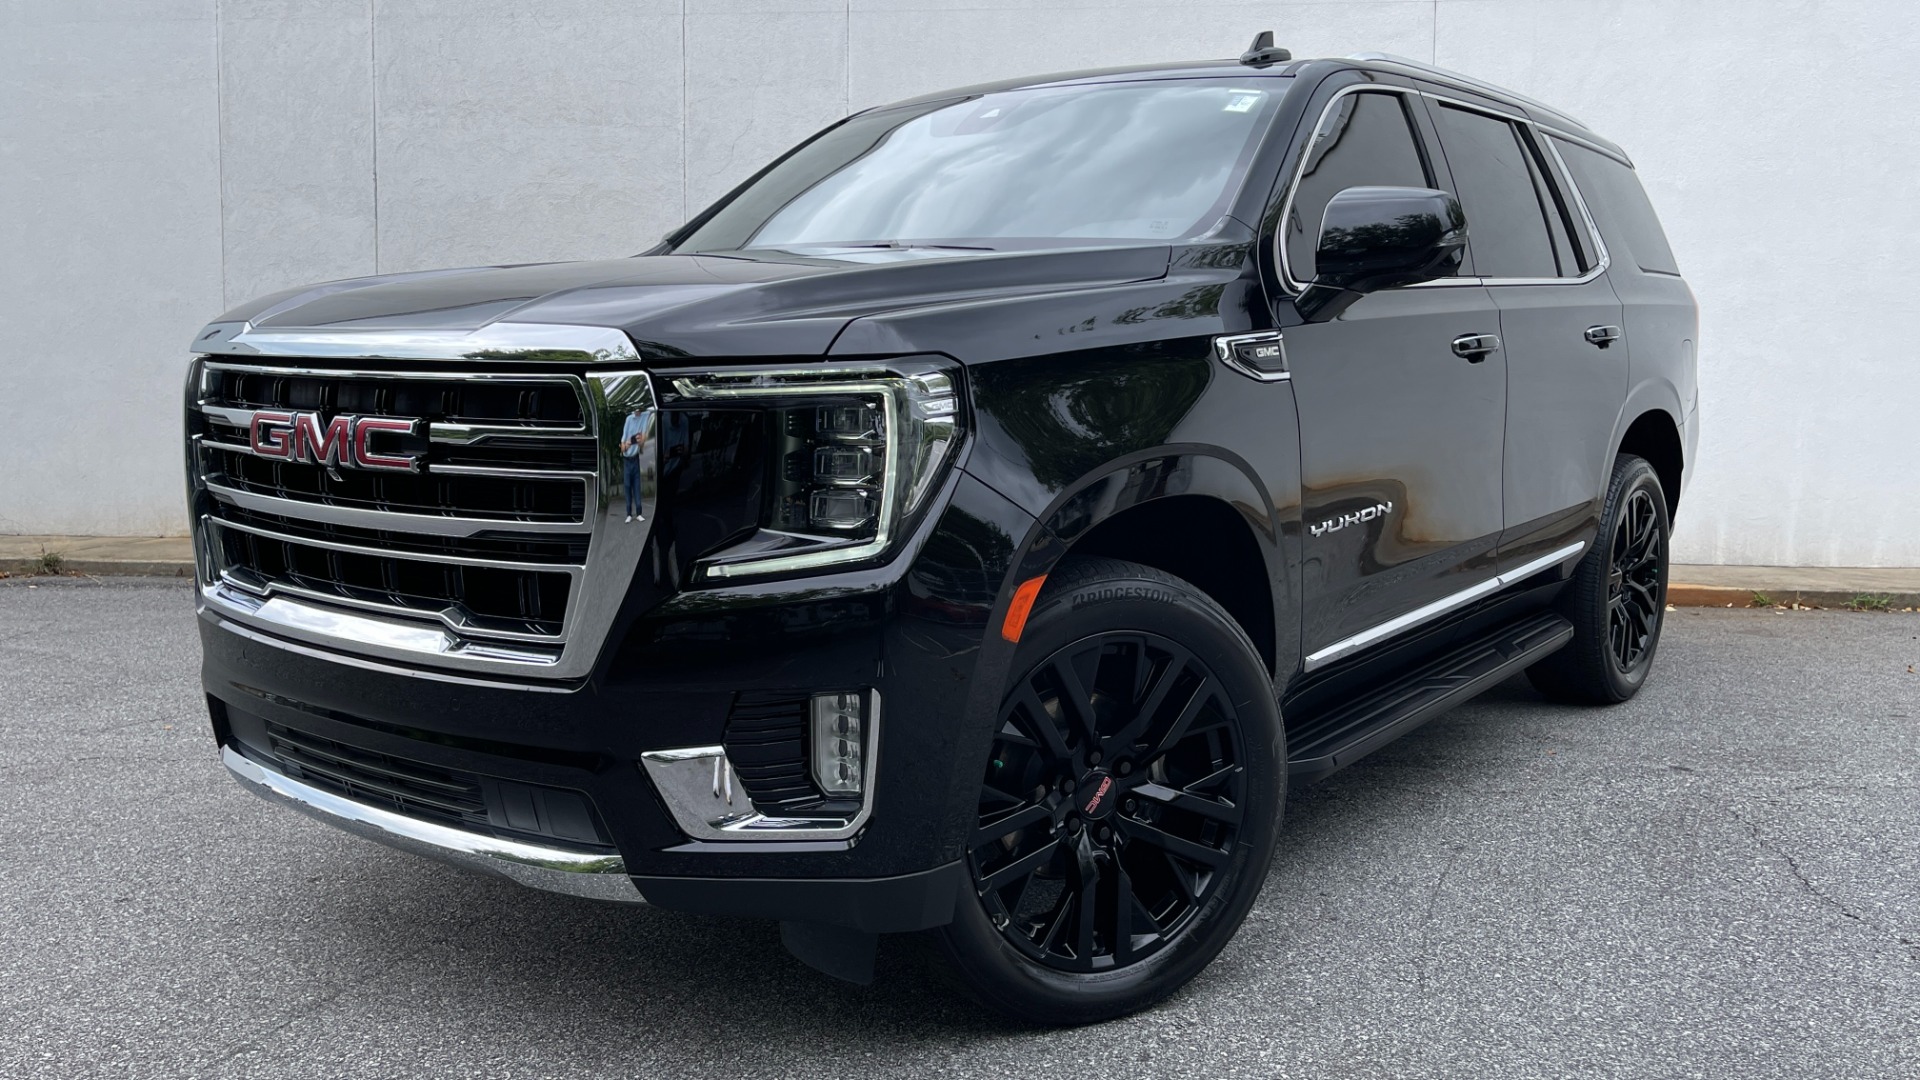 Used 2021 GMC Yukon SLT / REAR ENTERTAINMENT / 22IN WHEELS / LUXURY PLUS PACKAGE / 4WD for sale $69,995 at Formula Imports in Charlotte NC 28227 52